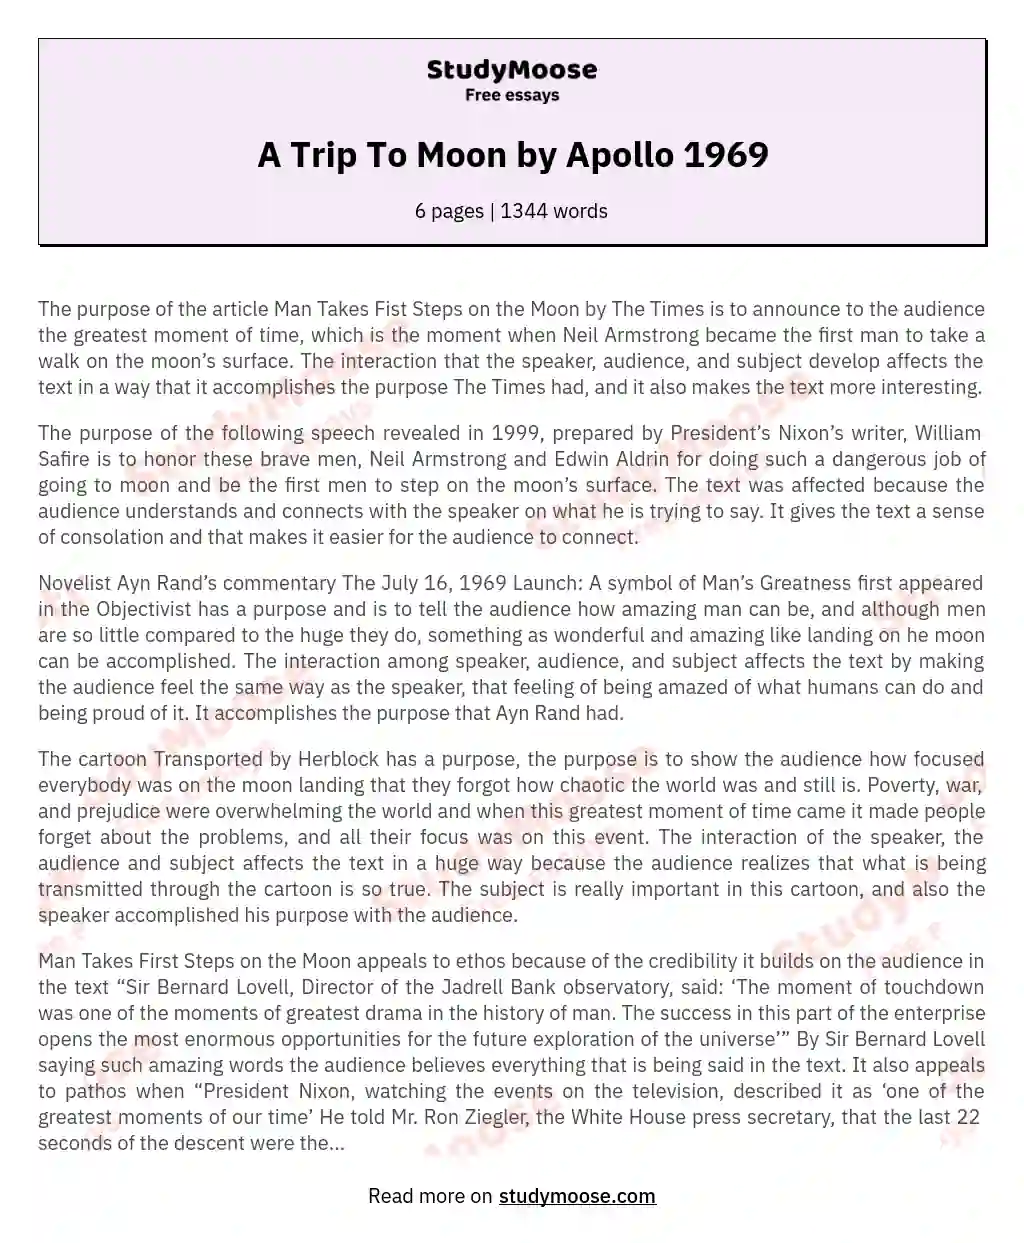 A Trip To Moon by Apollo 1969